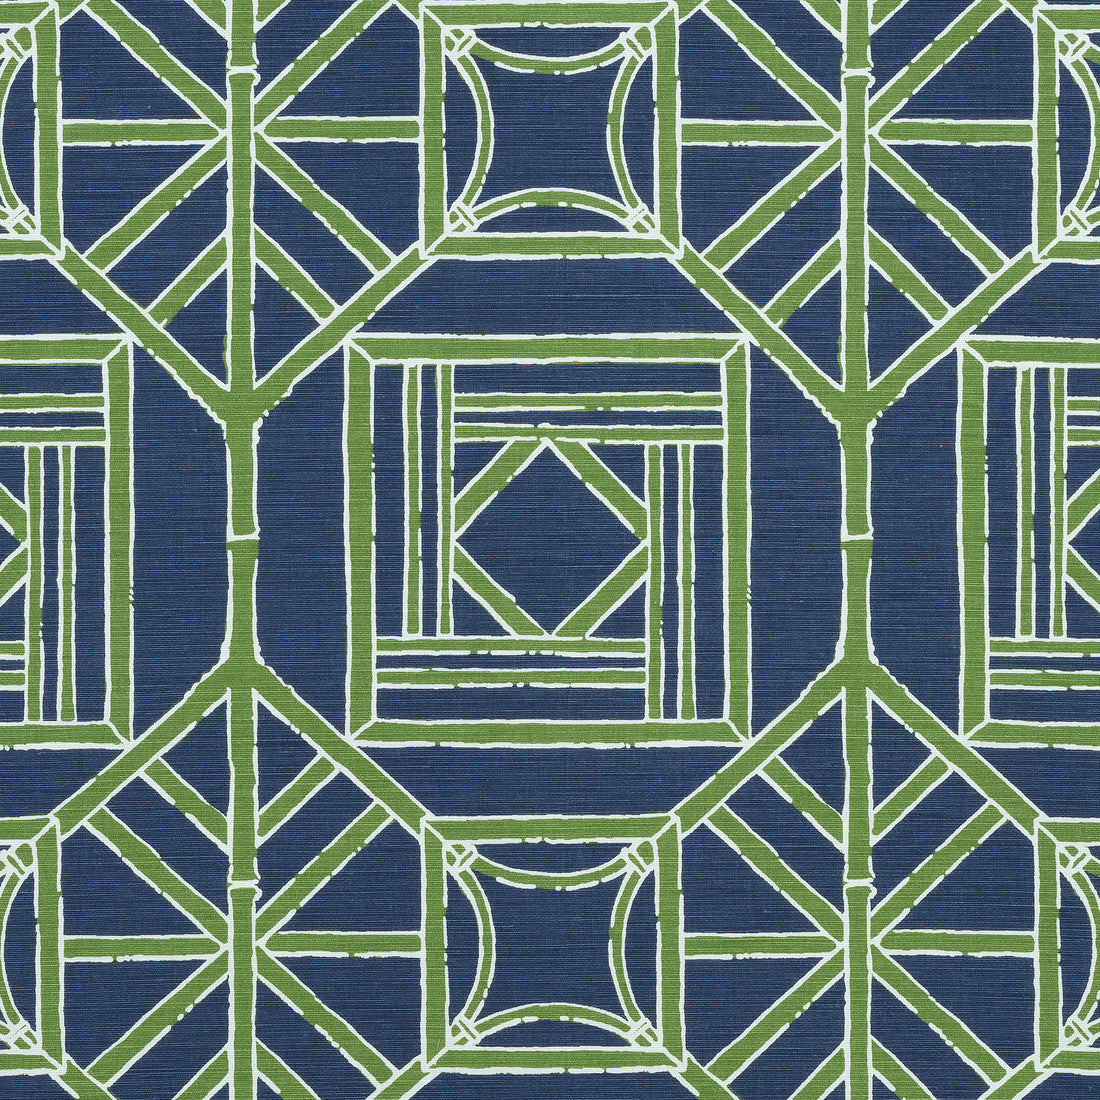 Shoji Panel fabric in navy and green color - pattern number F975521 - by Thibaut in the Dynasty collection